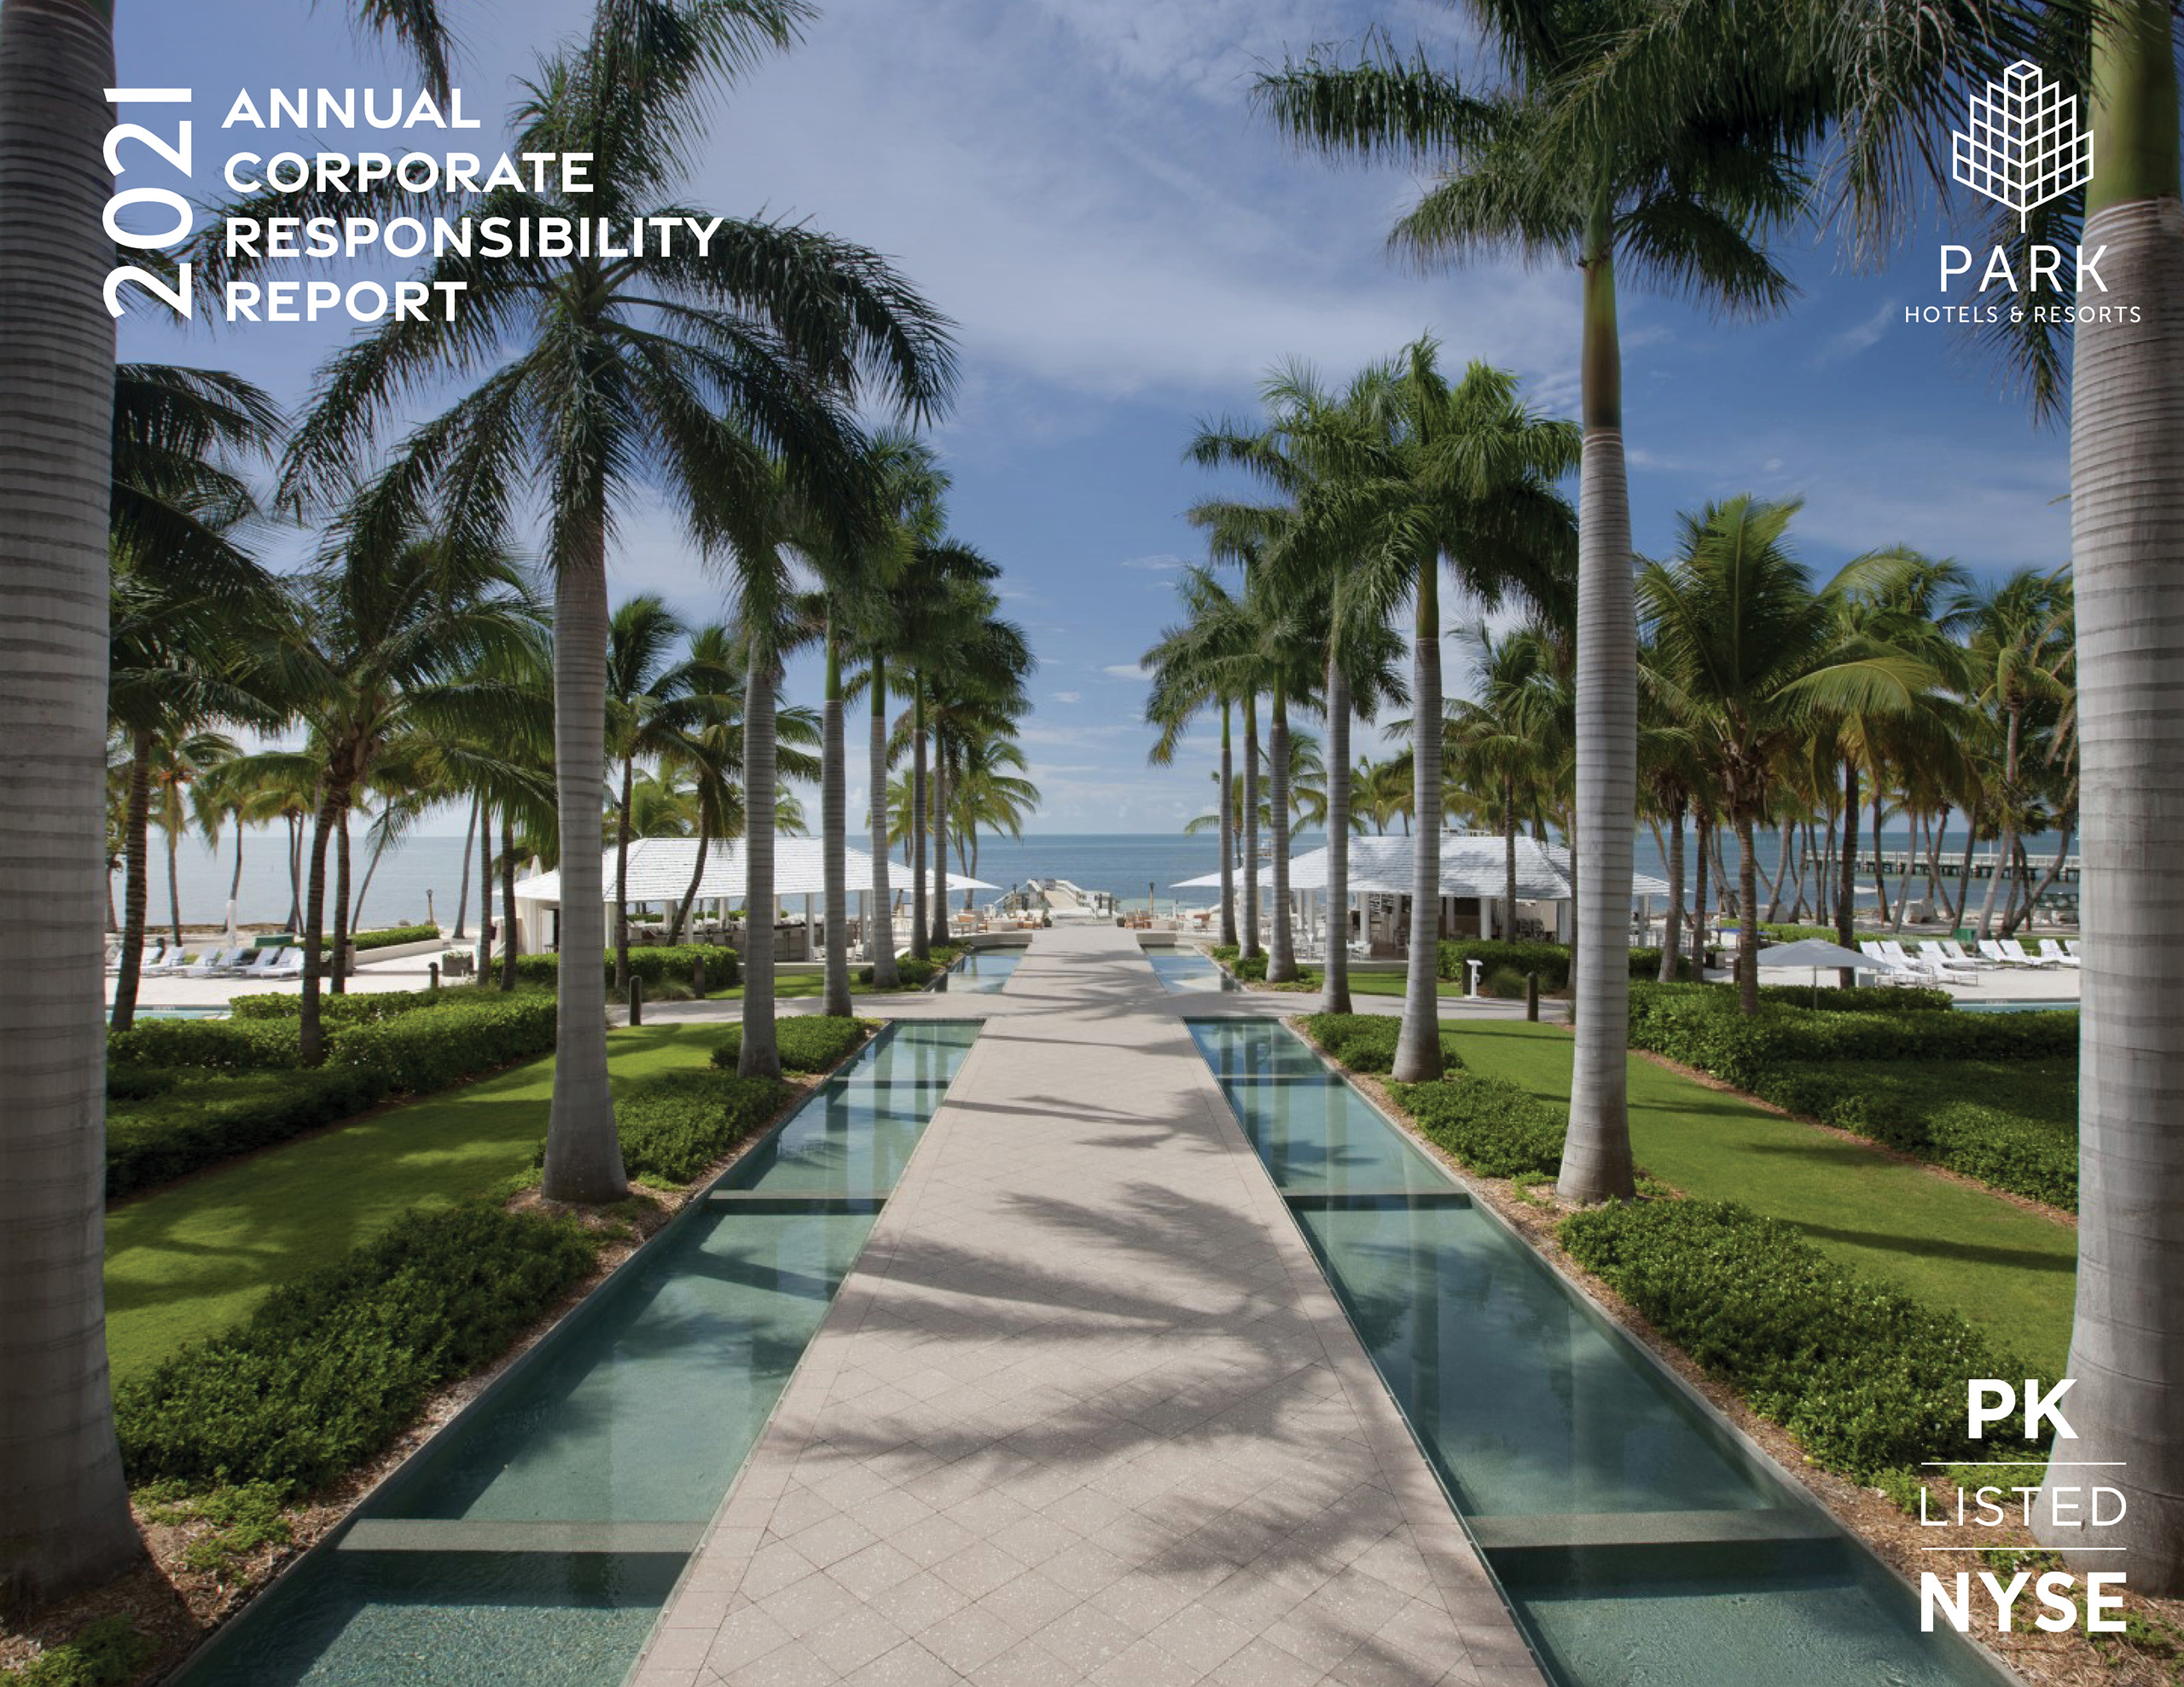 Park Hotels & Resorts 2021 Annual Corporate Responsibility Report